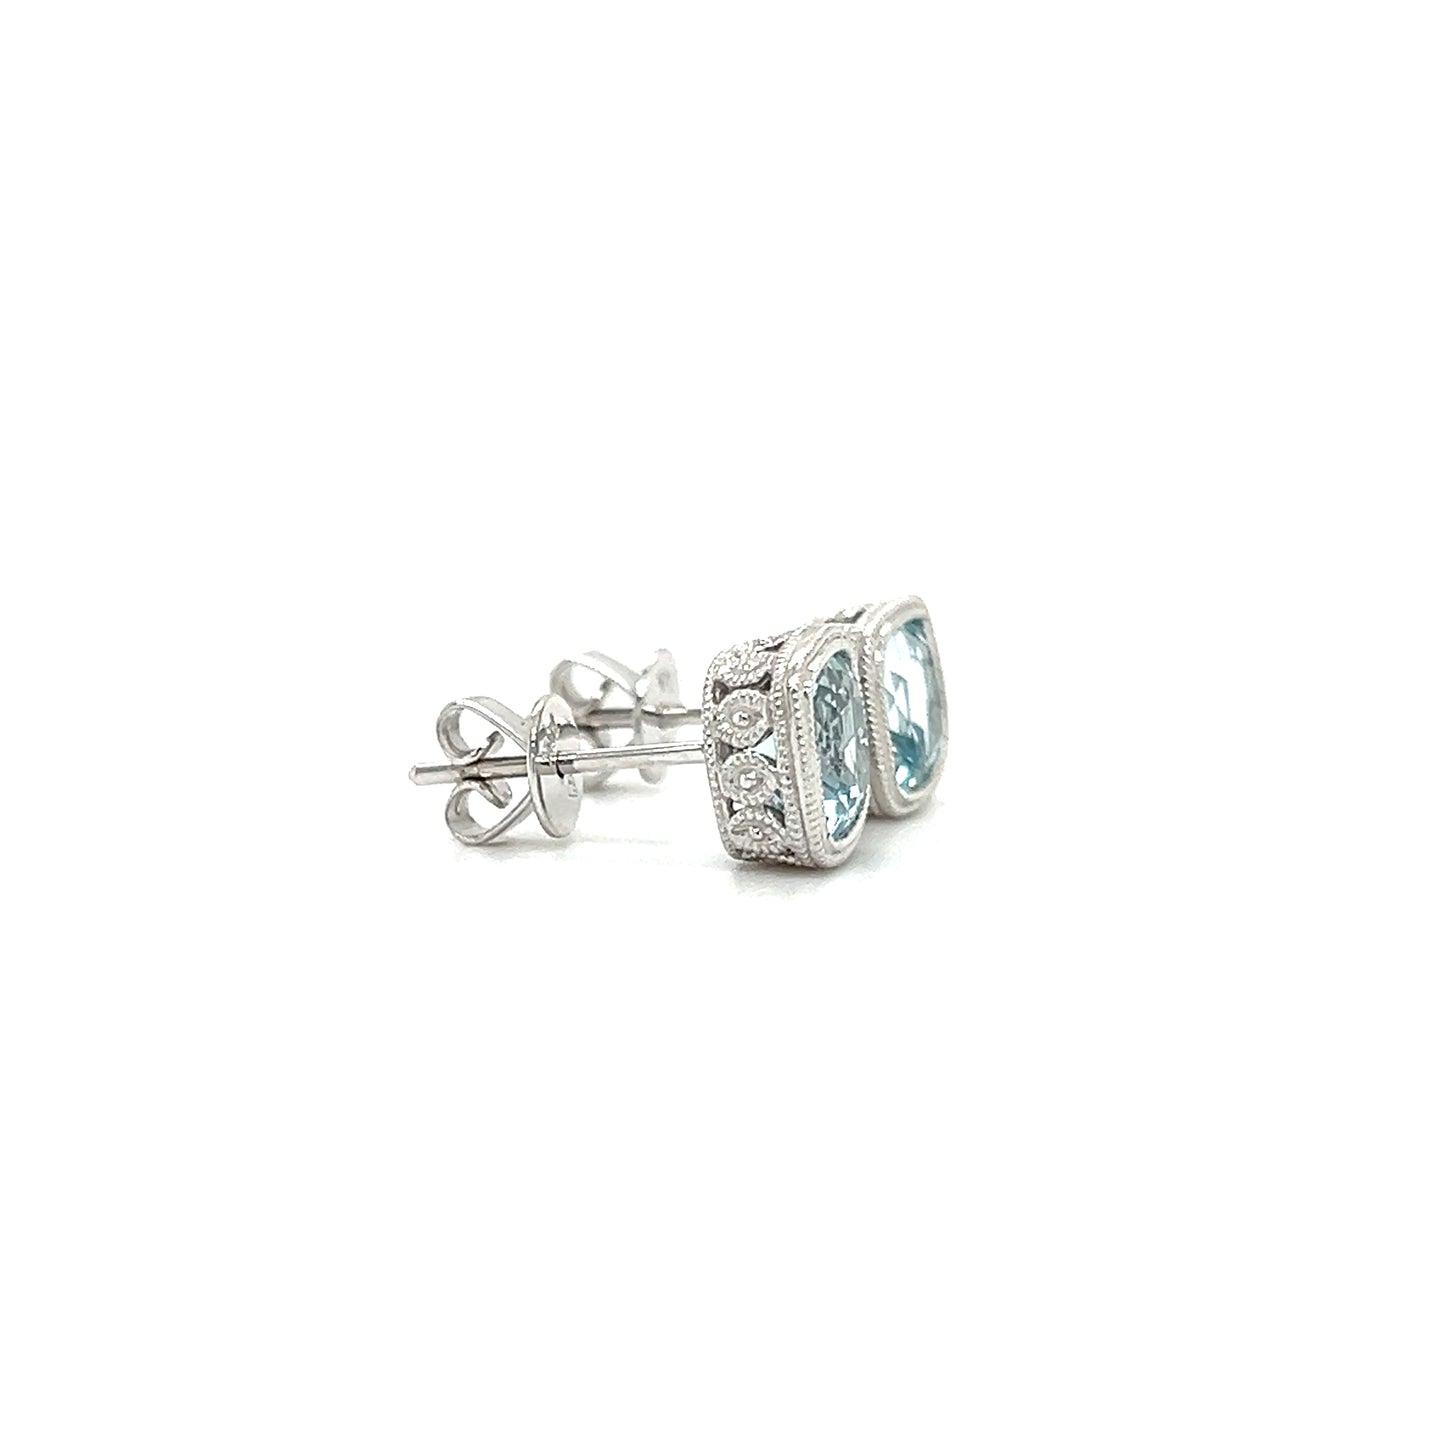 Aquamarine Stud Earrings with Milgrain and Filigree Details in 14K White Gold Left Side View